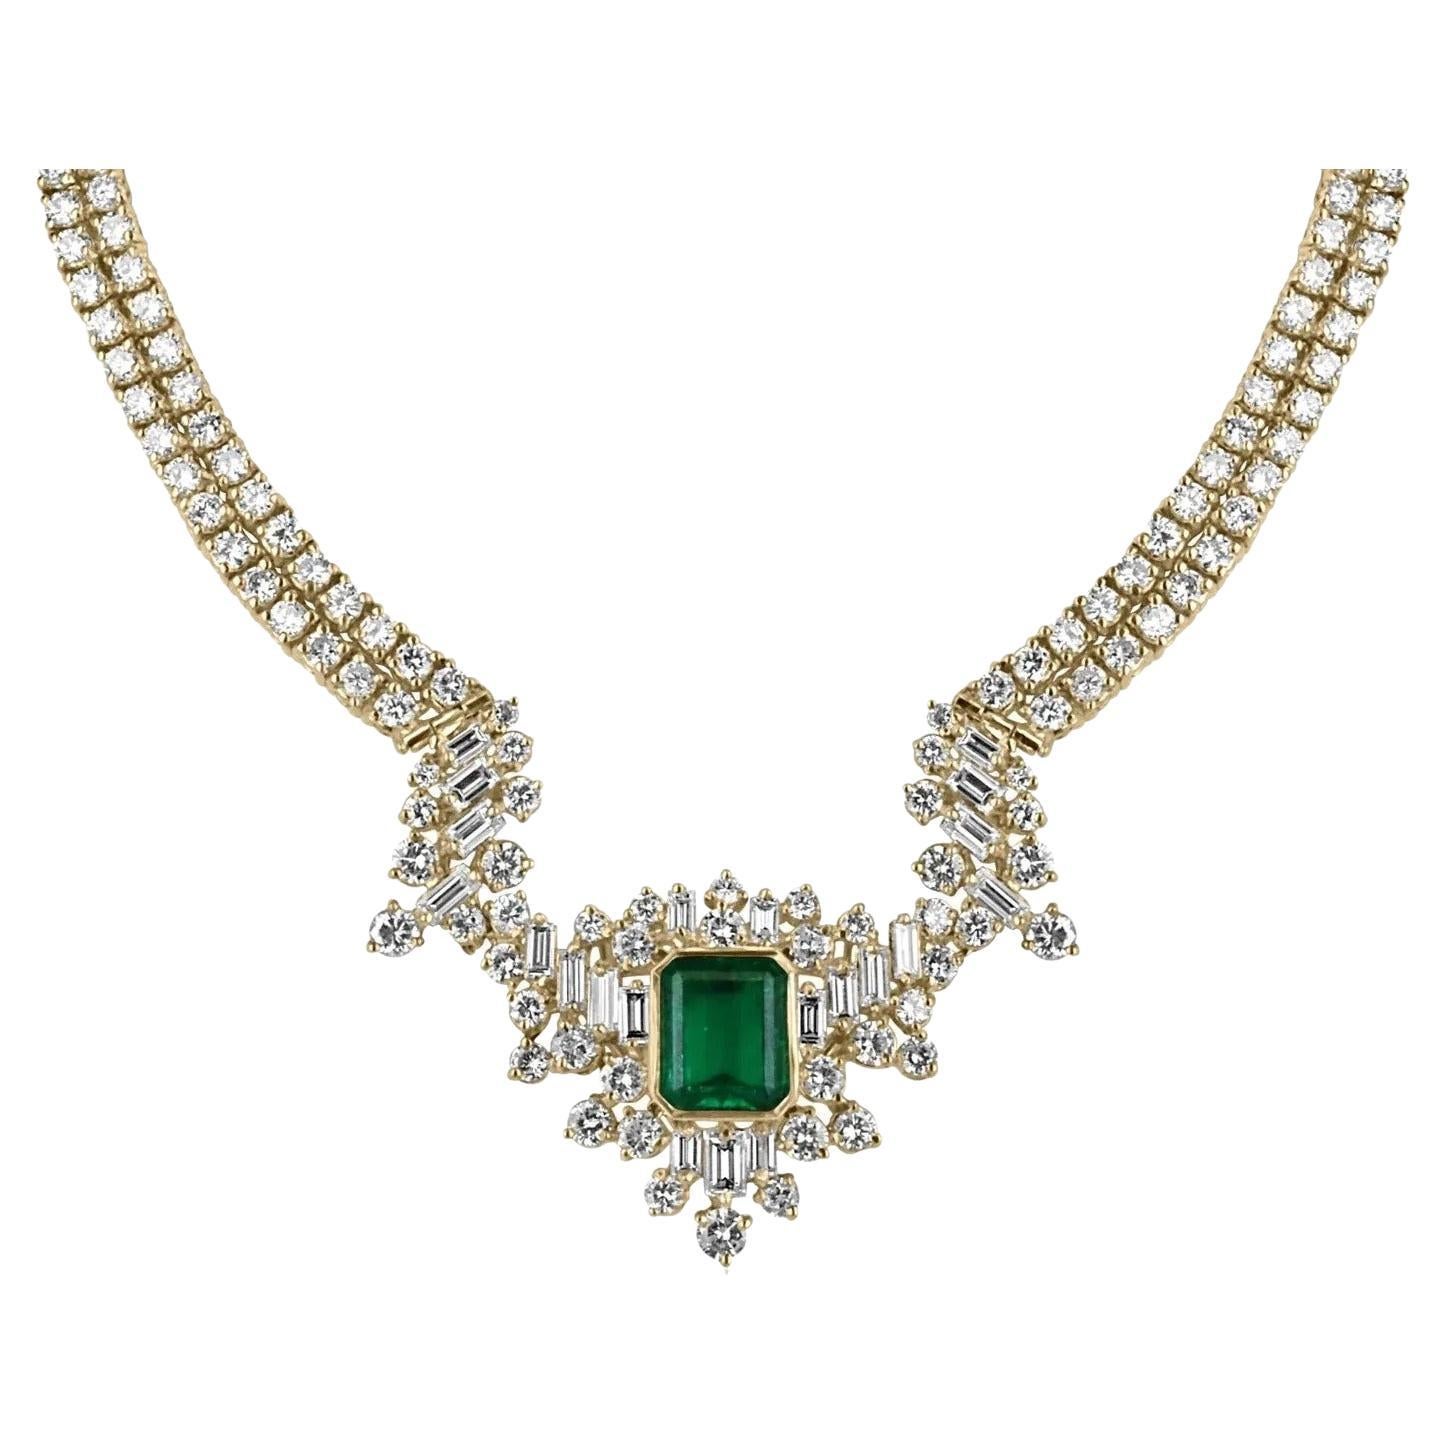 23.06tcw AAA+ Investment Grade Colombia Emerald & Diamond Statement Necklace 18K